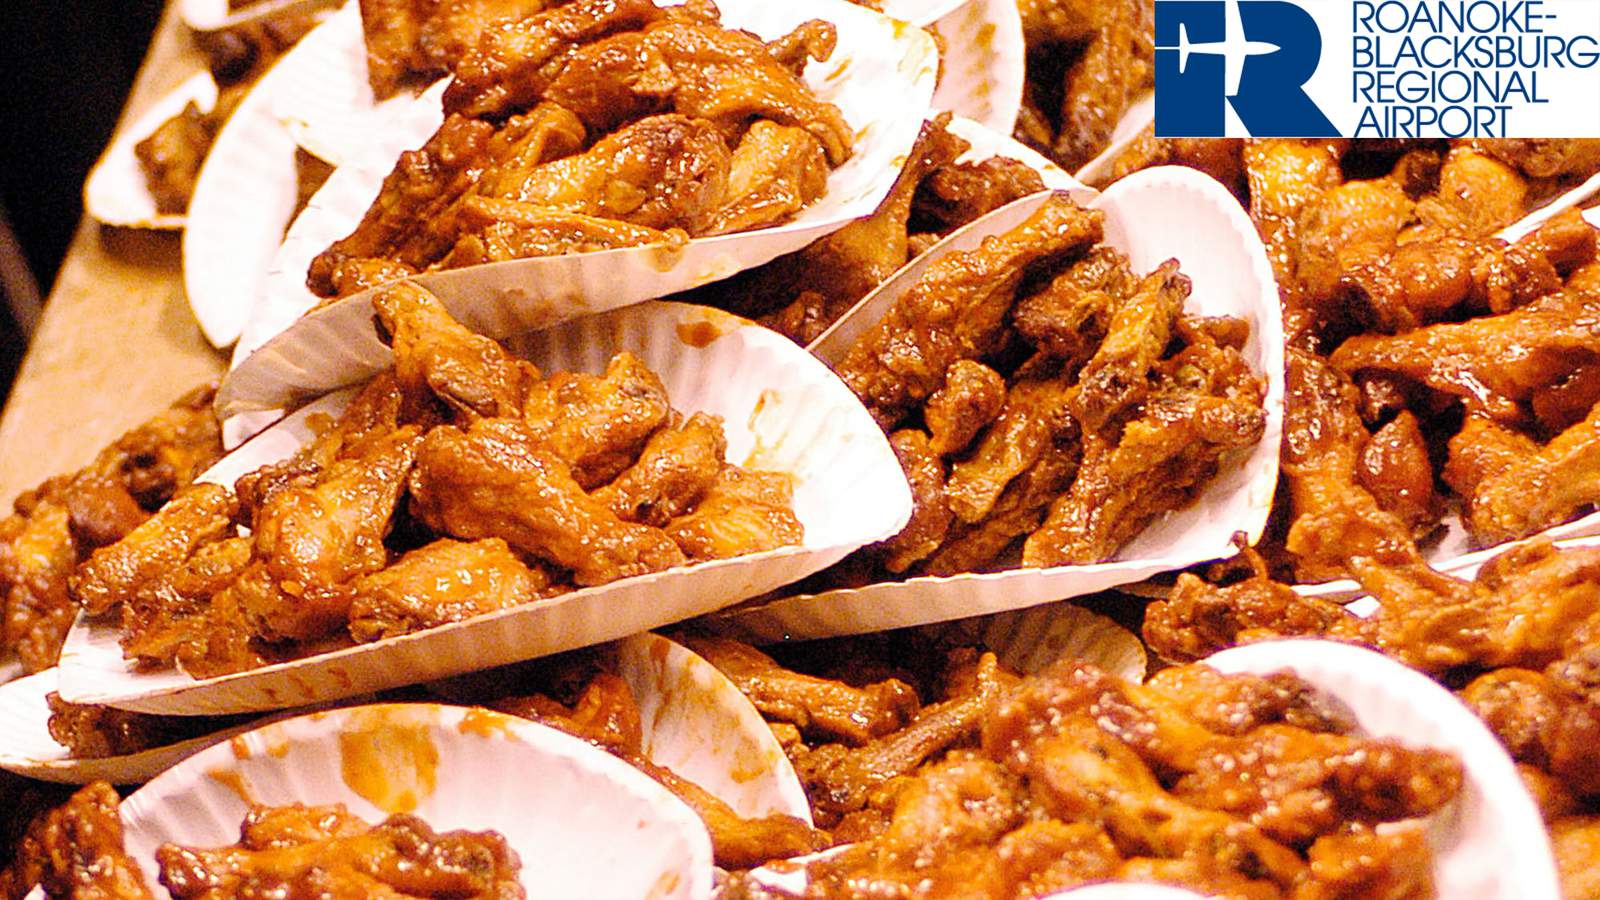 Top 10: Best Place for Wings